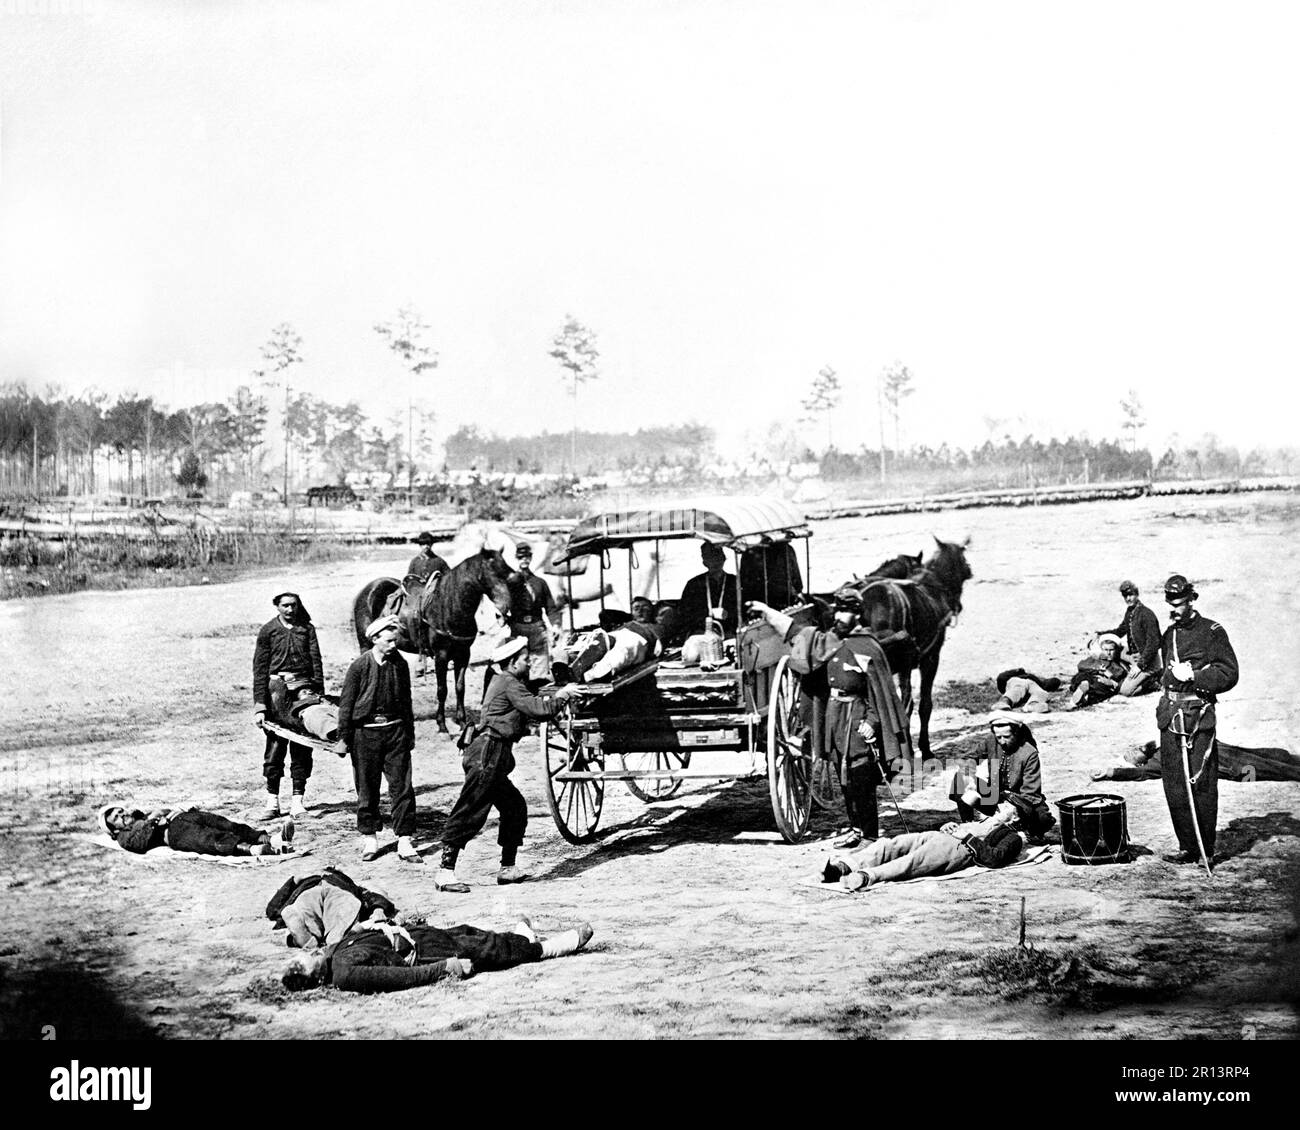 Ambulance Corps removing wounded from the field. United States Civil War; Ca. 1861-1865. Photographer unknown. Stock Photo